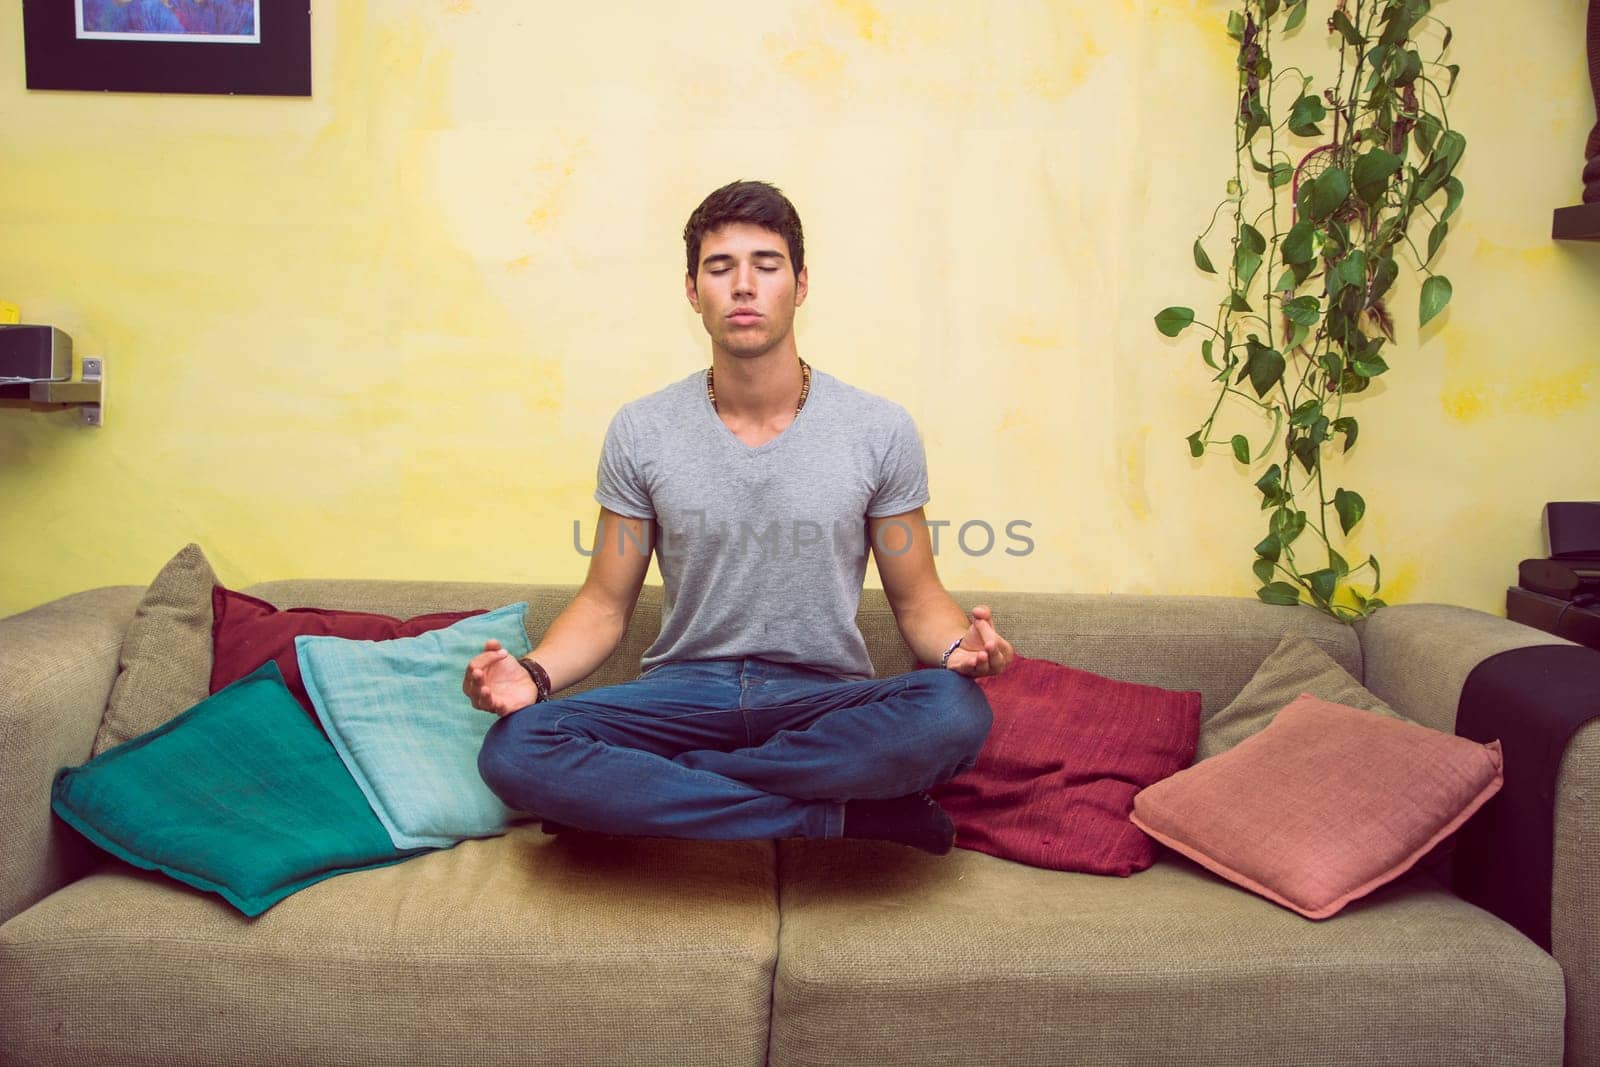 A man sitting on a couch in a yoga pose, magically levitating in the air